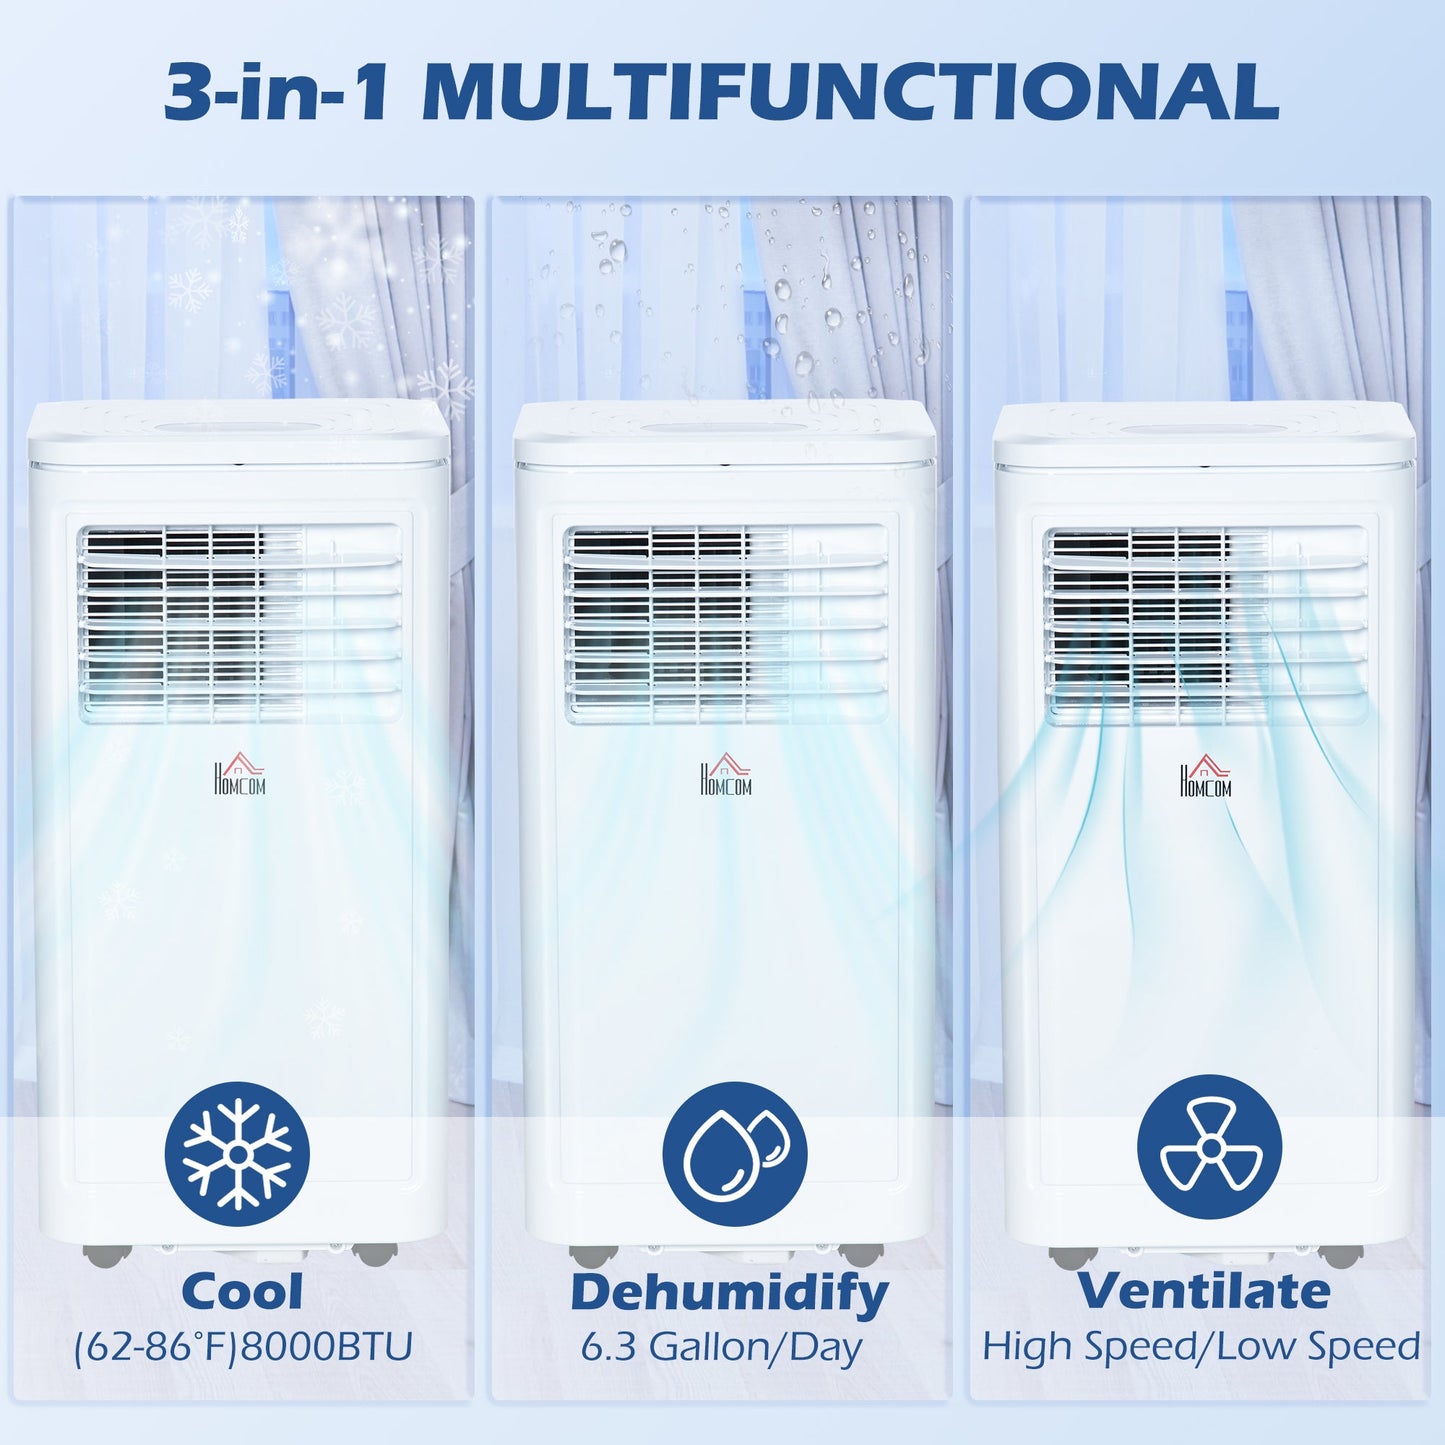 Miscellaneous-8,000 BTU Portable Air Conditioner Home AC Unit with Dehumidifier & Fan Mode, with Remote,Cools 161Sq Ft, 24H Timer, Black - Outdoor Style Company